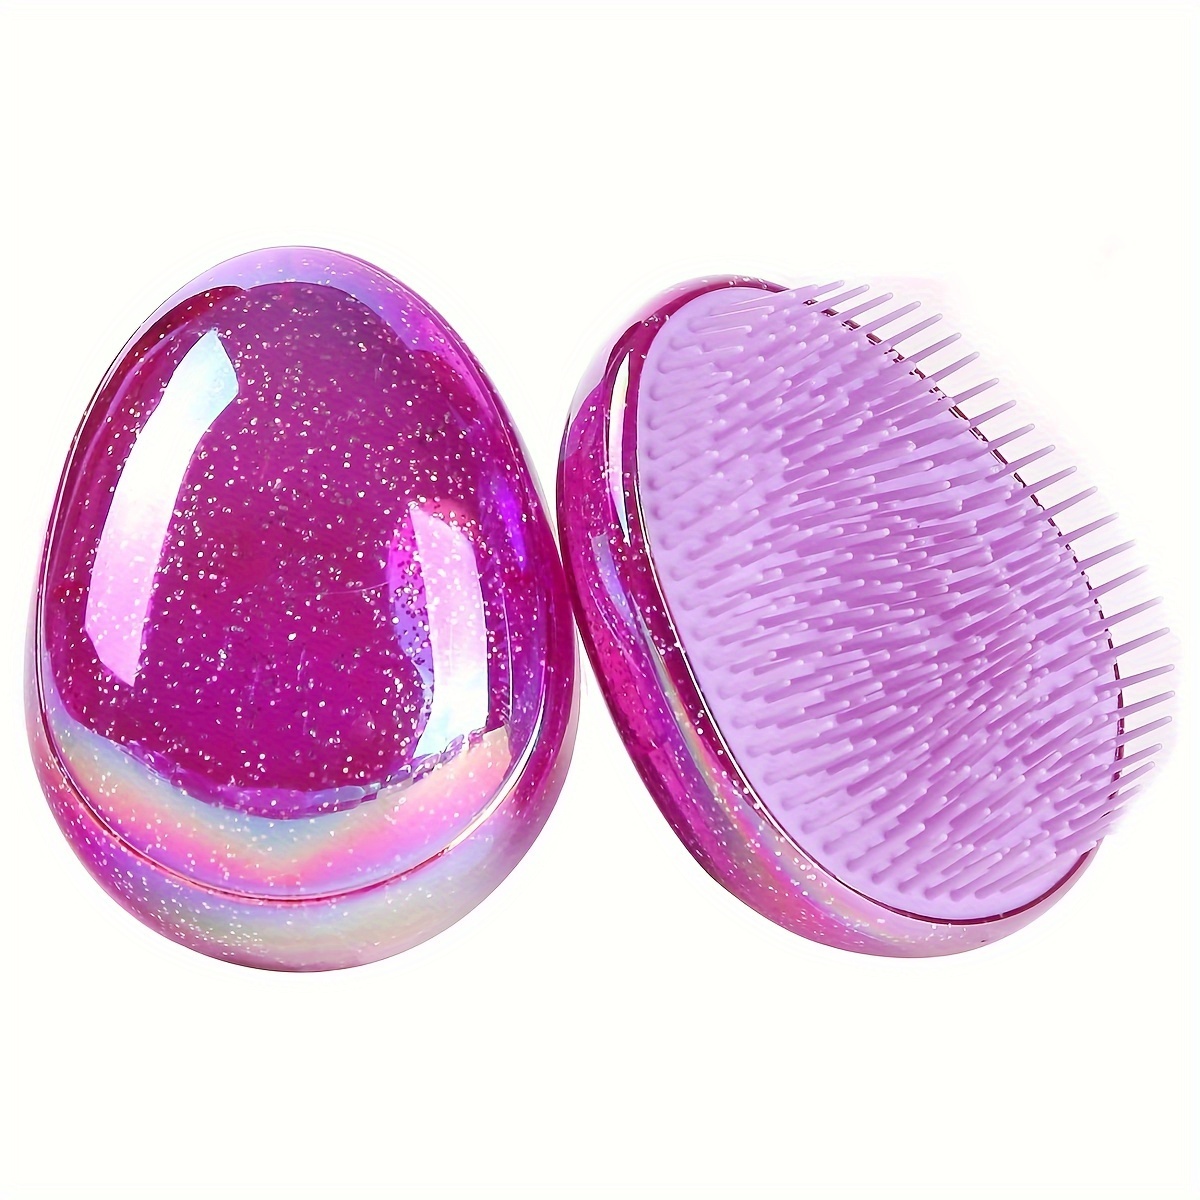 

1pc Egg-shaped Detangling Brush, Anti-knot Massage Comb, Wet And Dry Portable Scalp Massager For Smooth Hair, Fine-tooth Rubber Bristle, Suitable For Normal Hair Type At Salon And Home